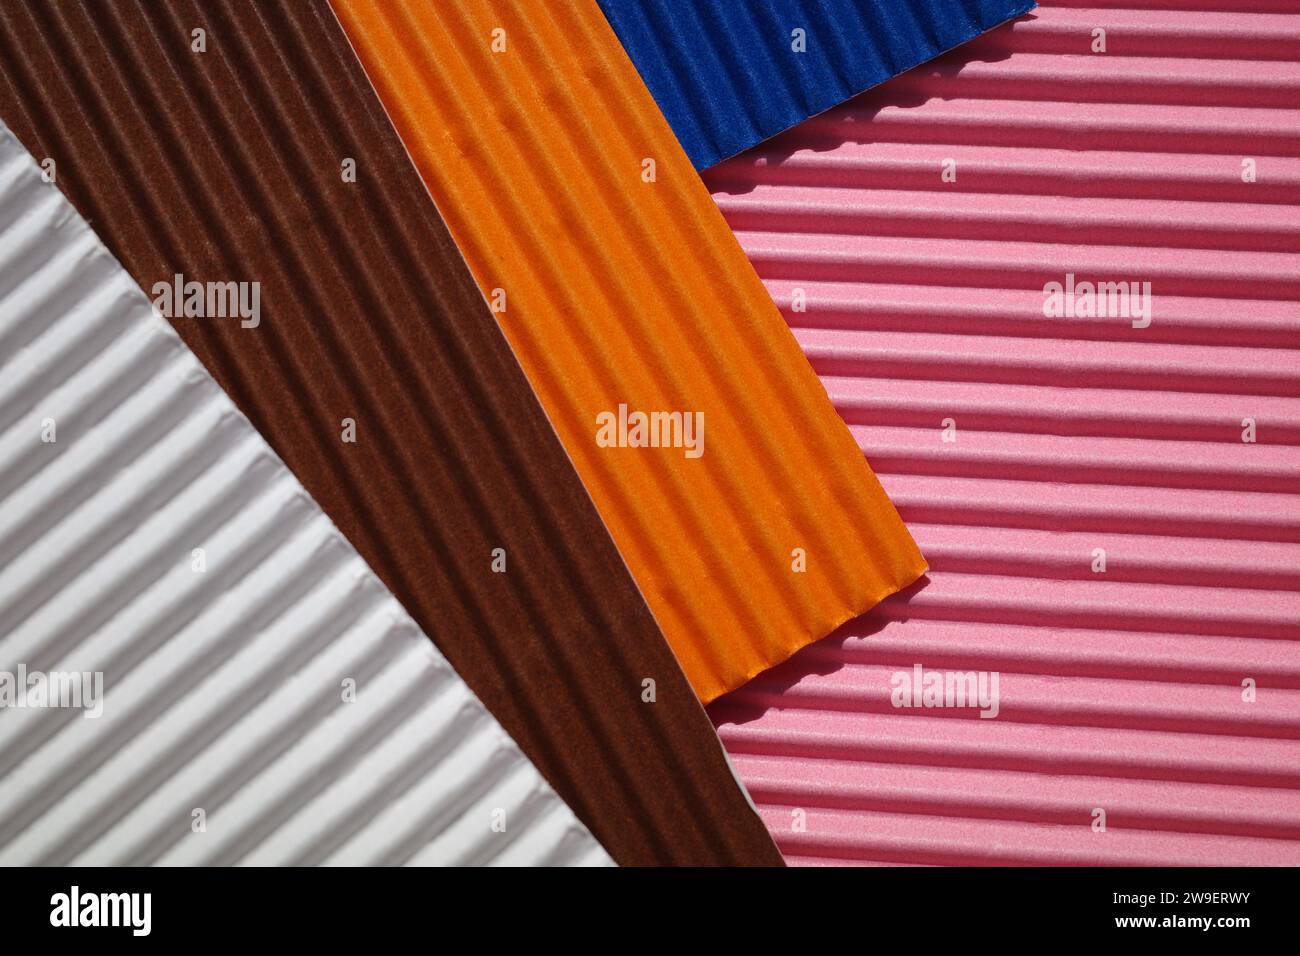 Horizontally and diagonally ribbed cardboard with the colors pink, white,  orange, brown, blue. Meant as background Stock Photo